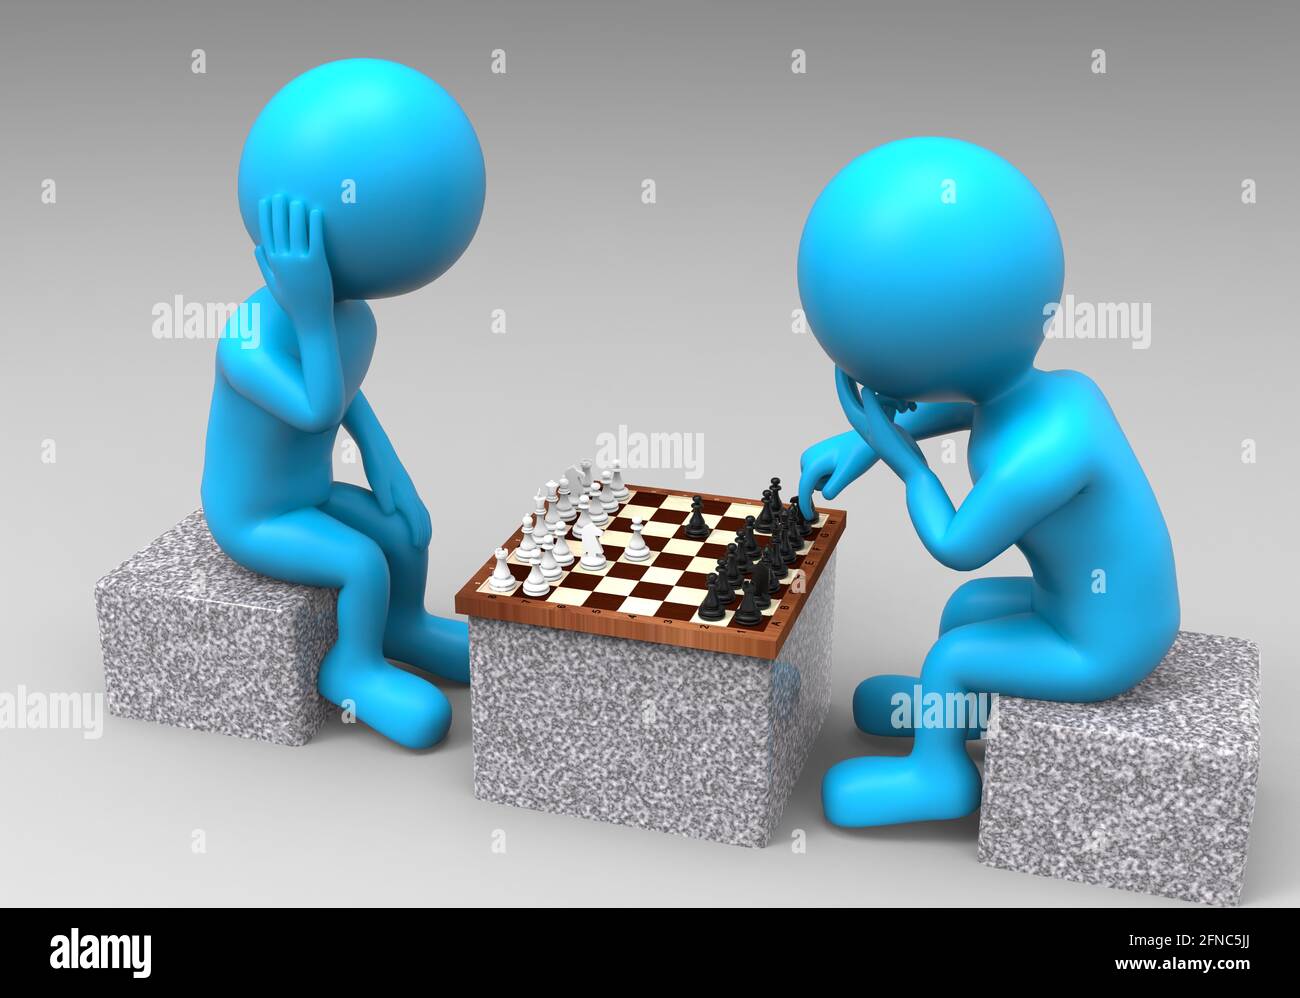 3d rendering of two balloonhead cuties playing chess somwhere outside Stock Photo